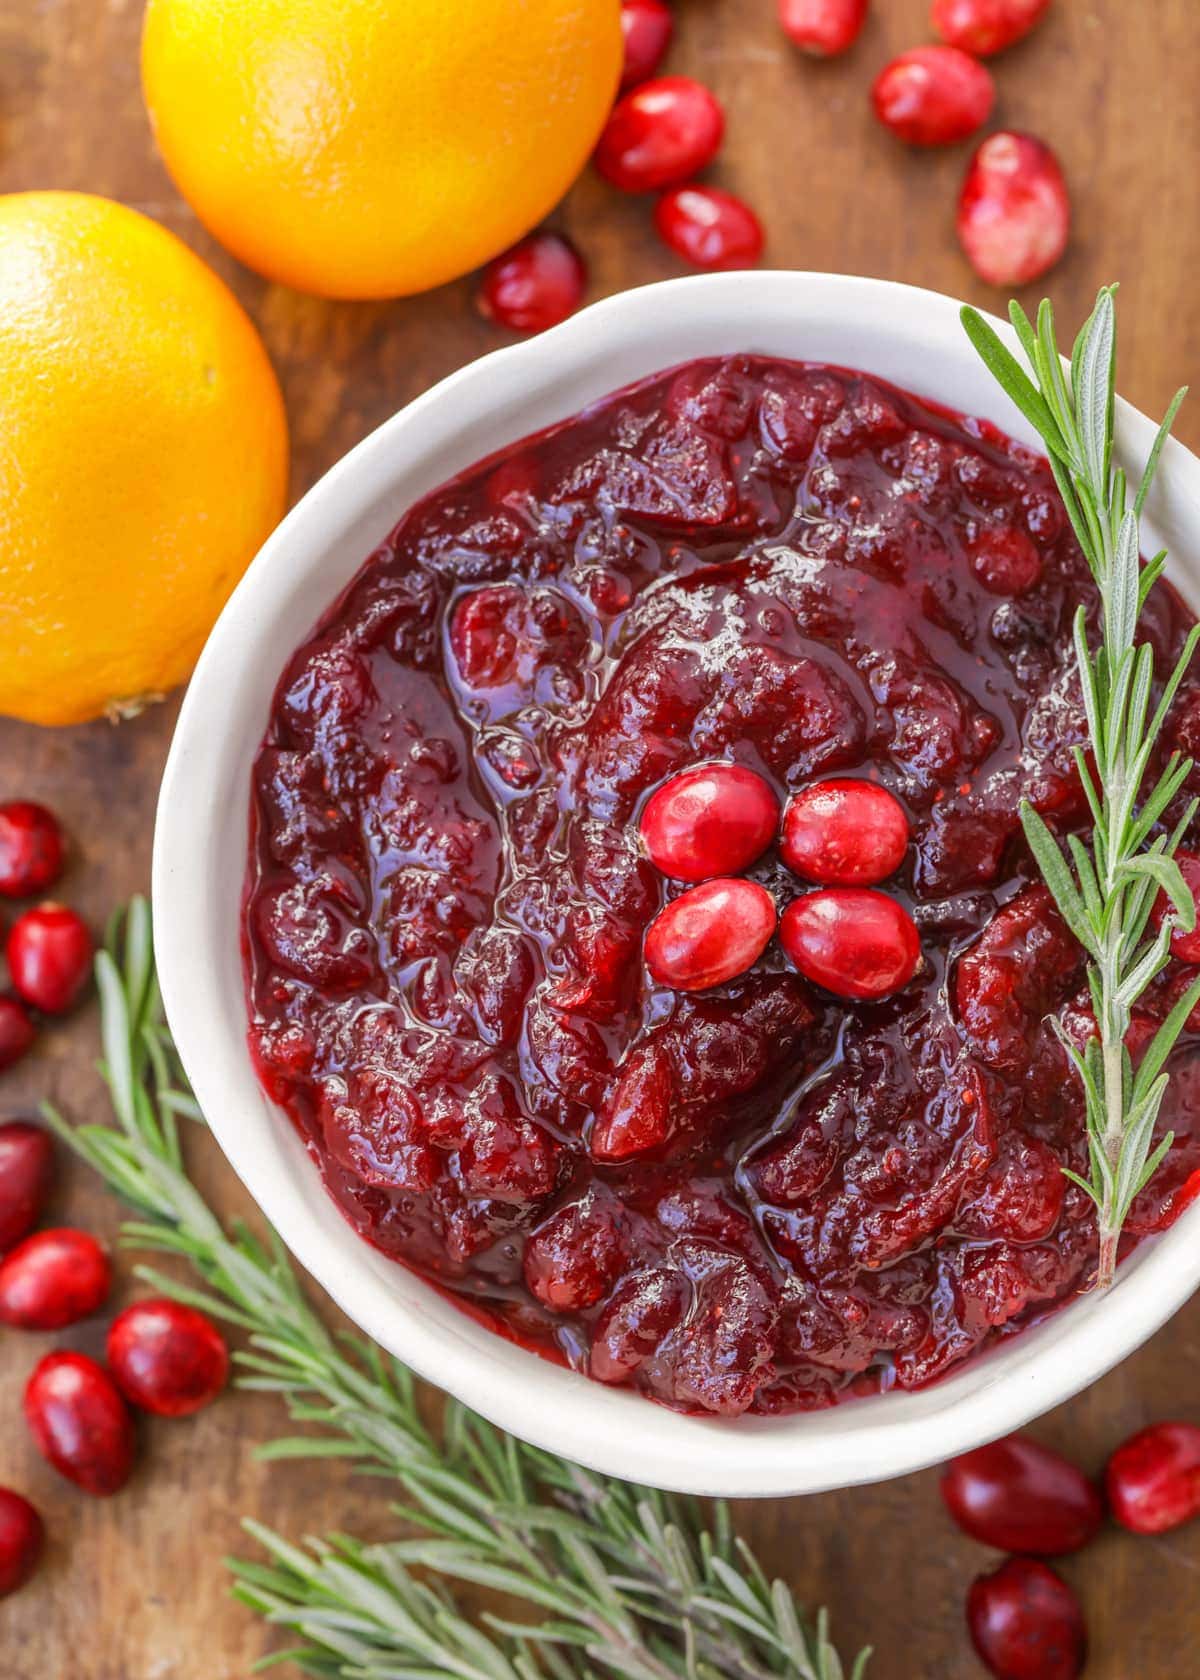 Homemade fresh cranberry sauce in a white dish.